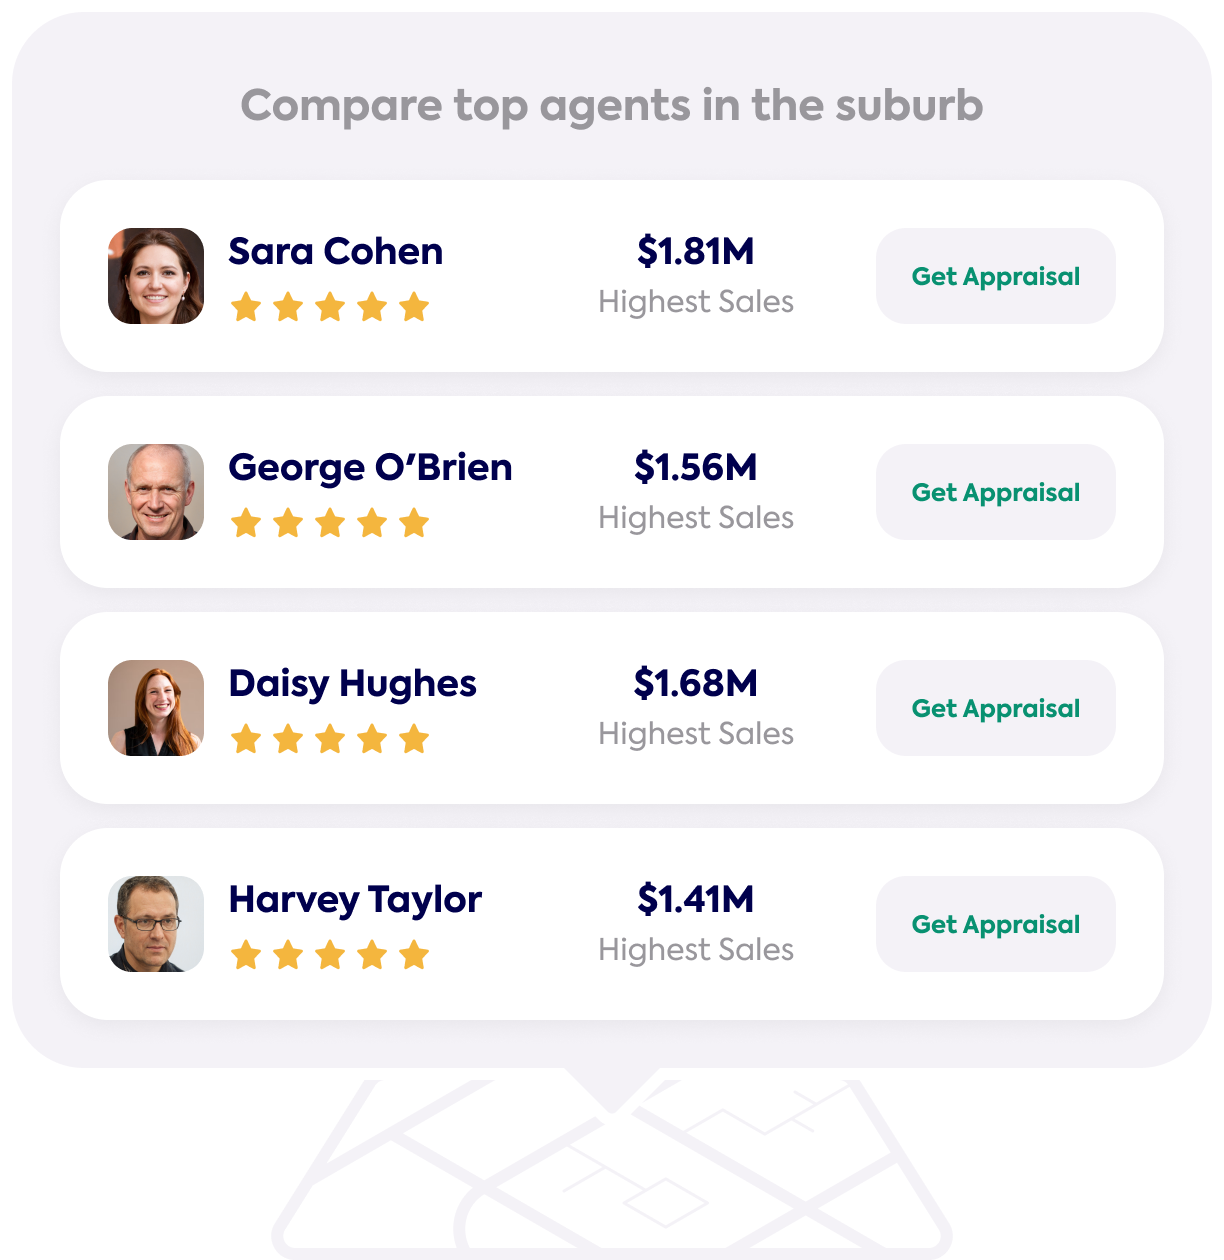 Compare top agents in the suburb